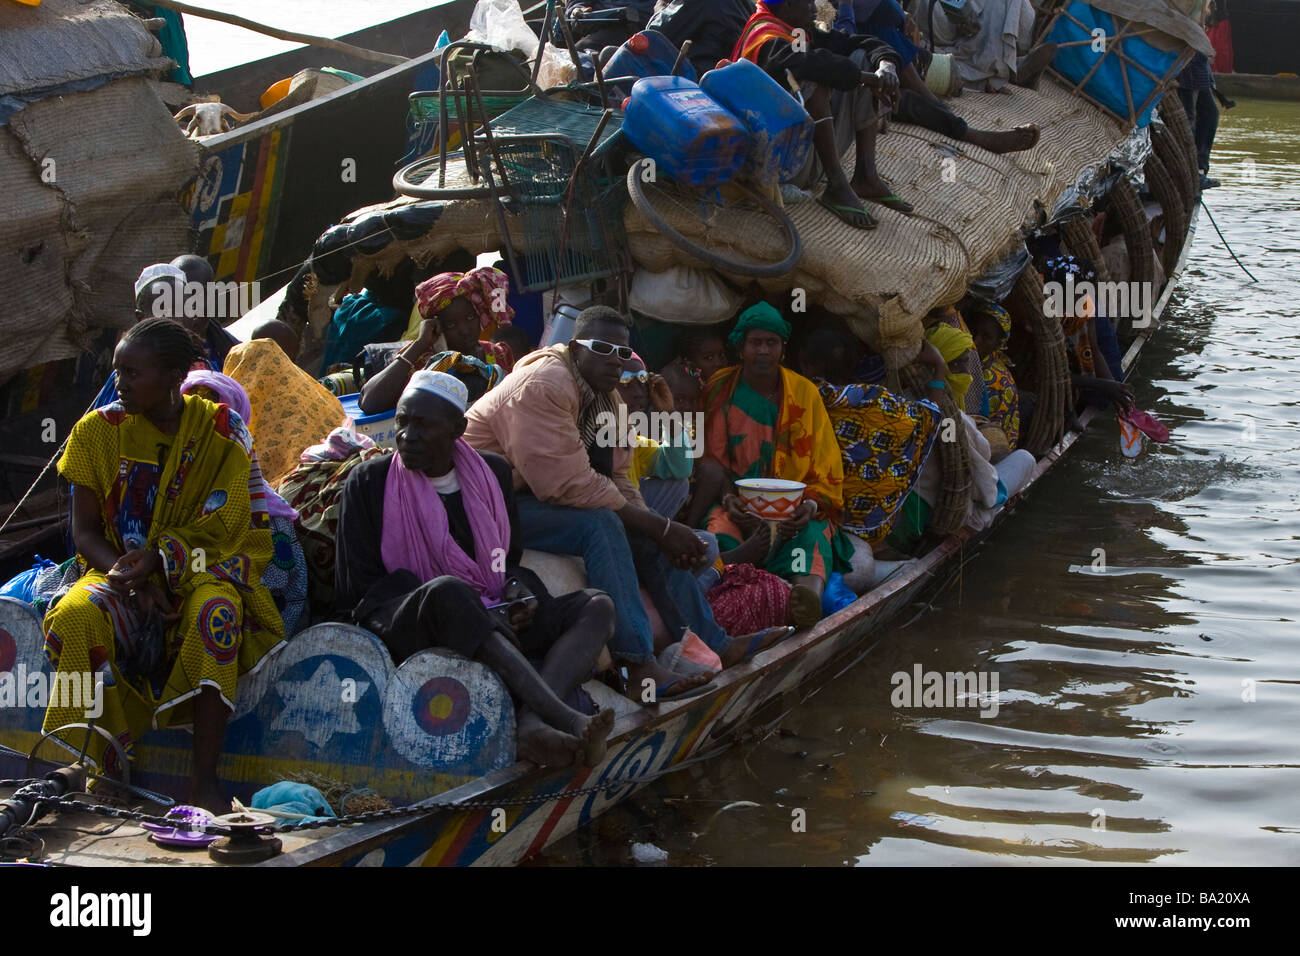 Crowded Pinasse at the Port in Mopti Mali Stock Photo